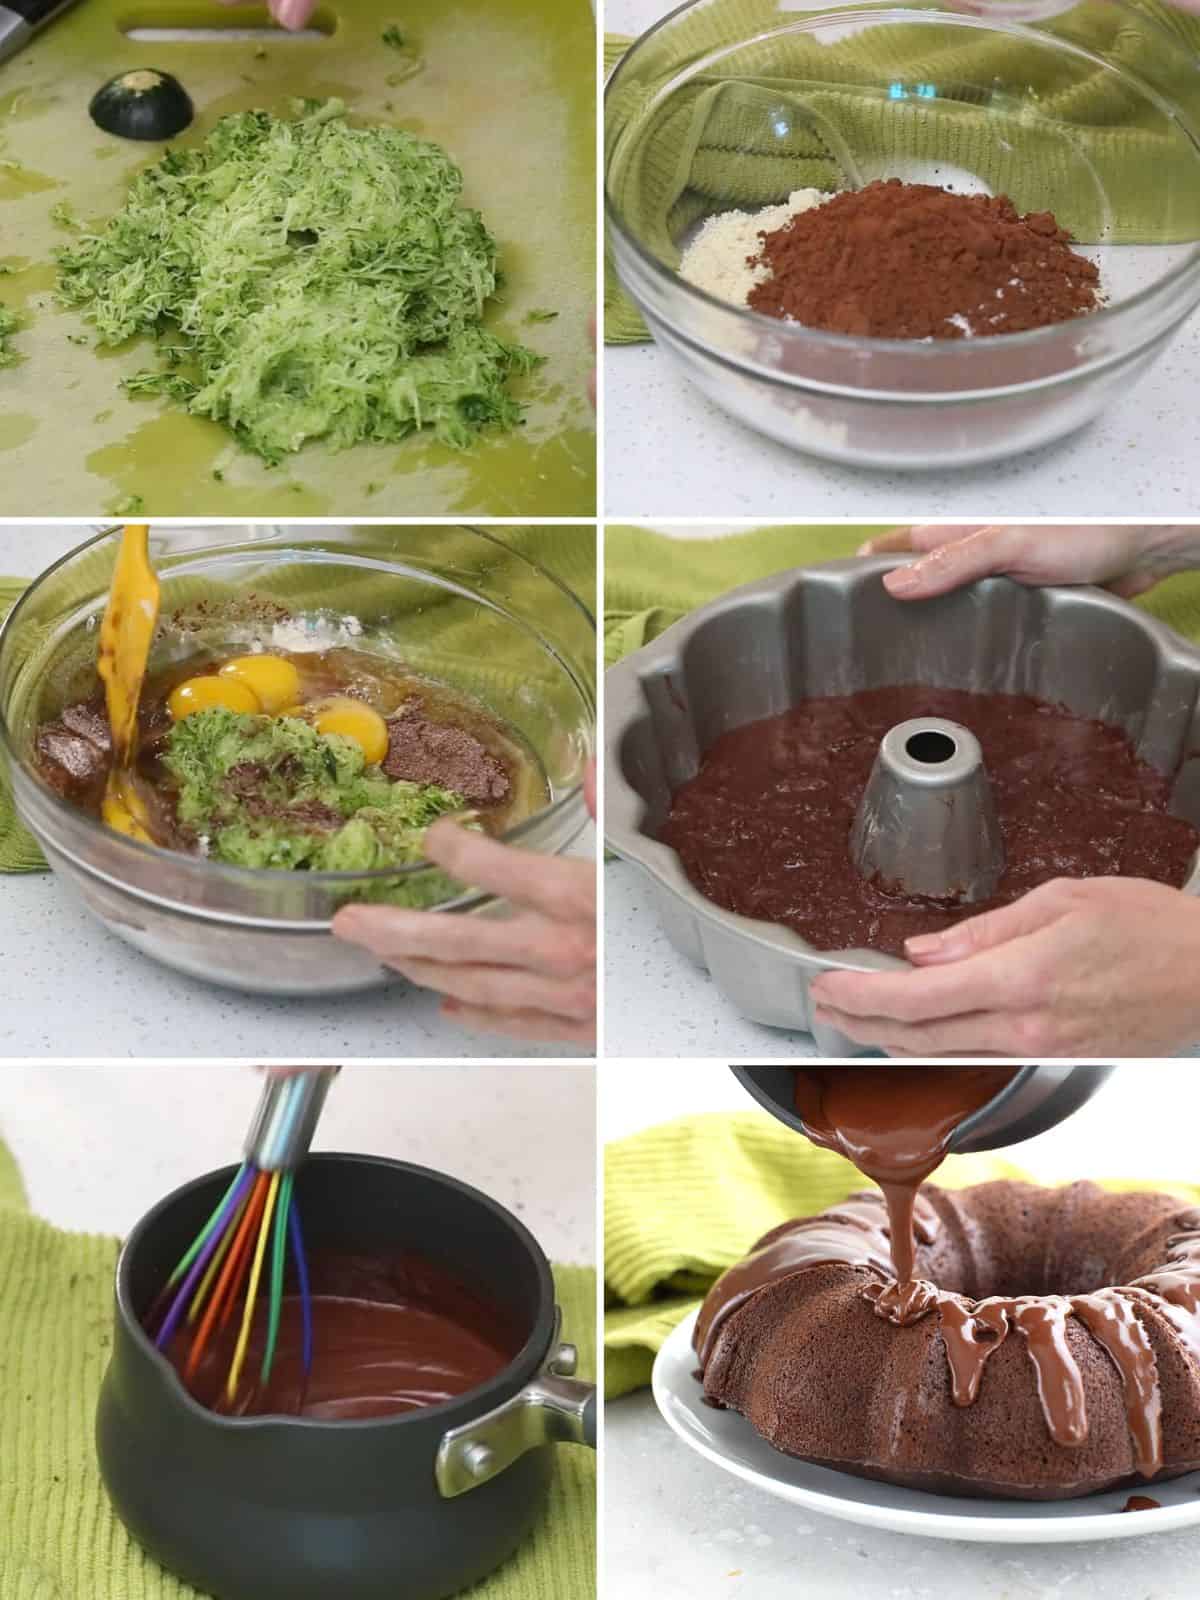 A collage of 6 images showing how to make Keto Chocolate Zucchini Cake.